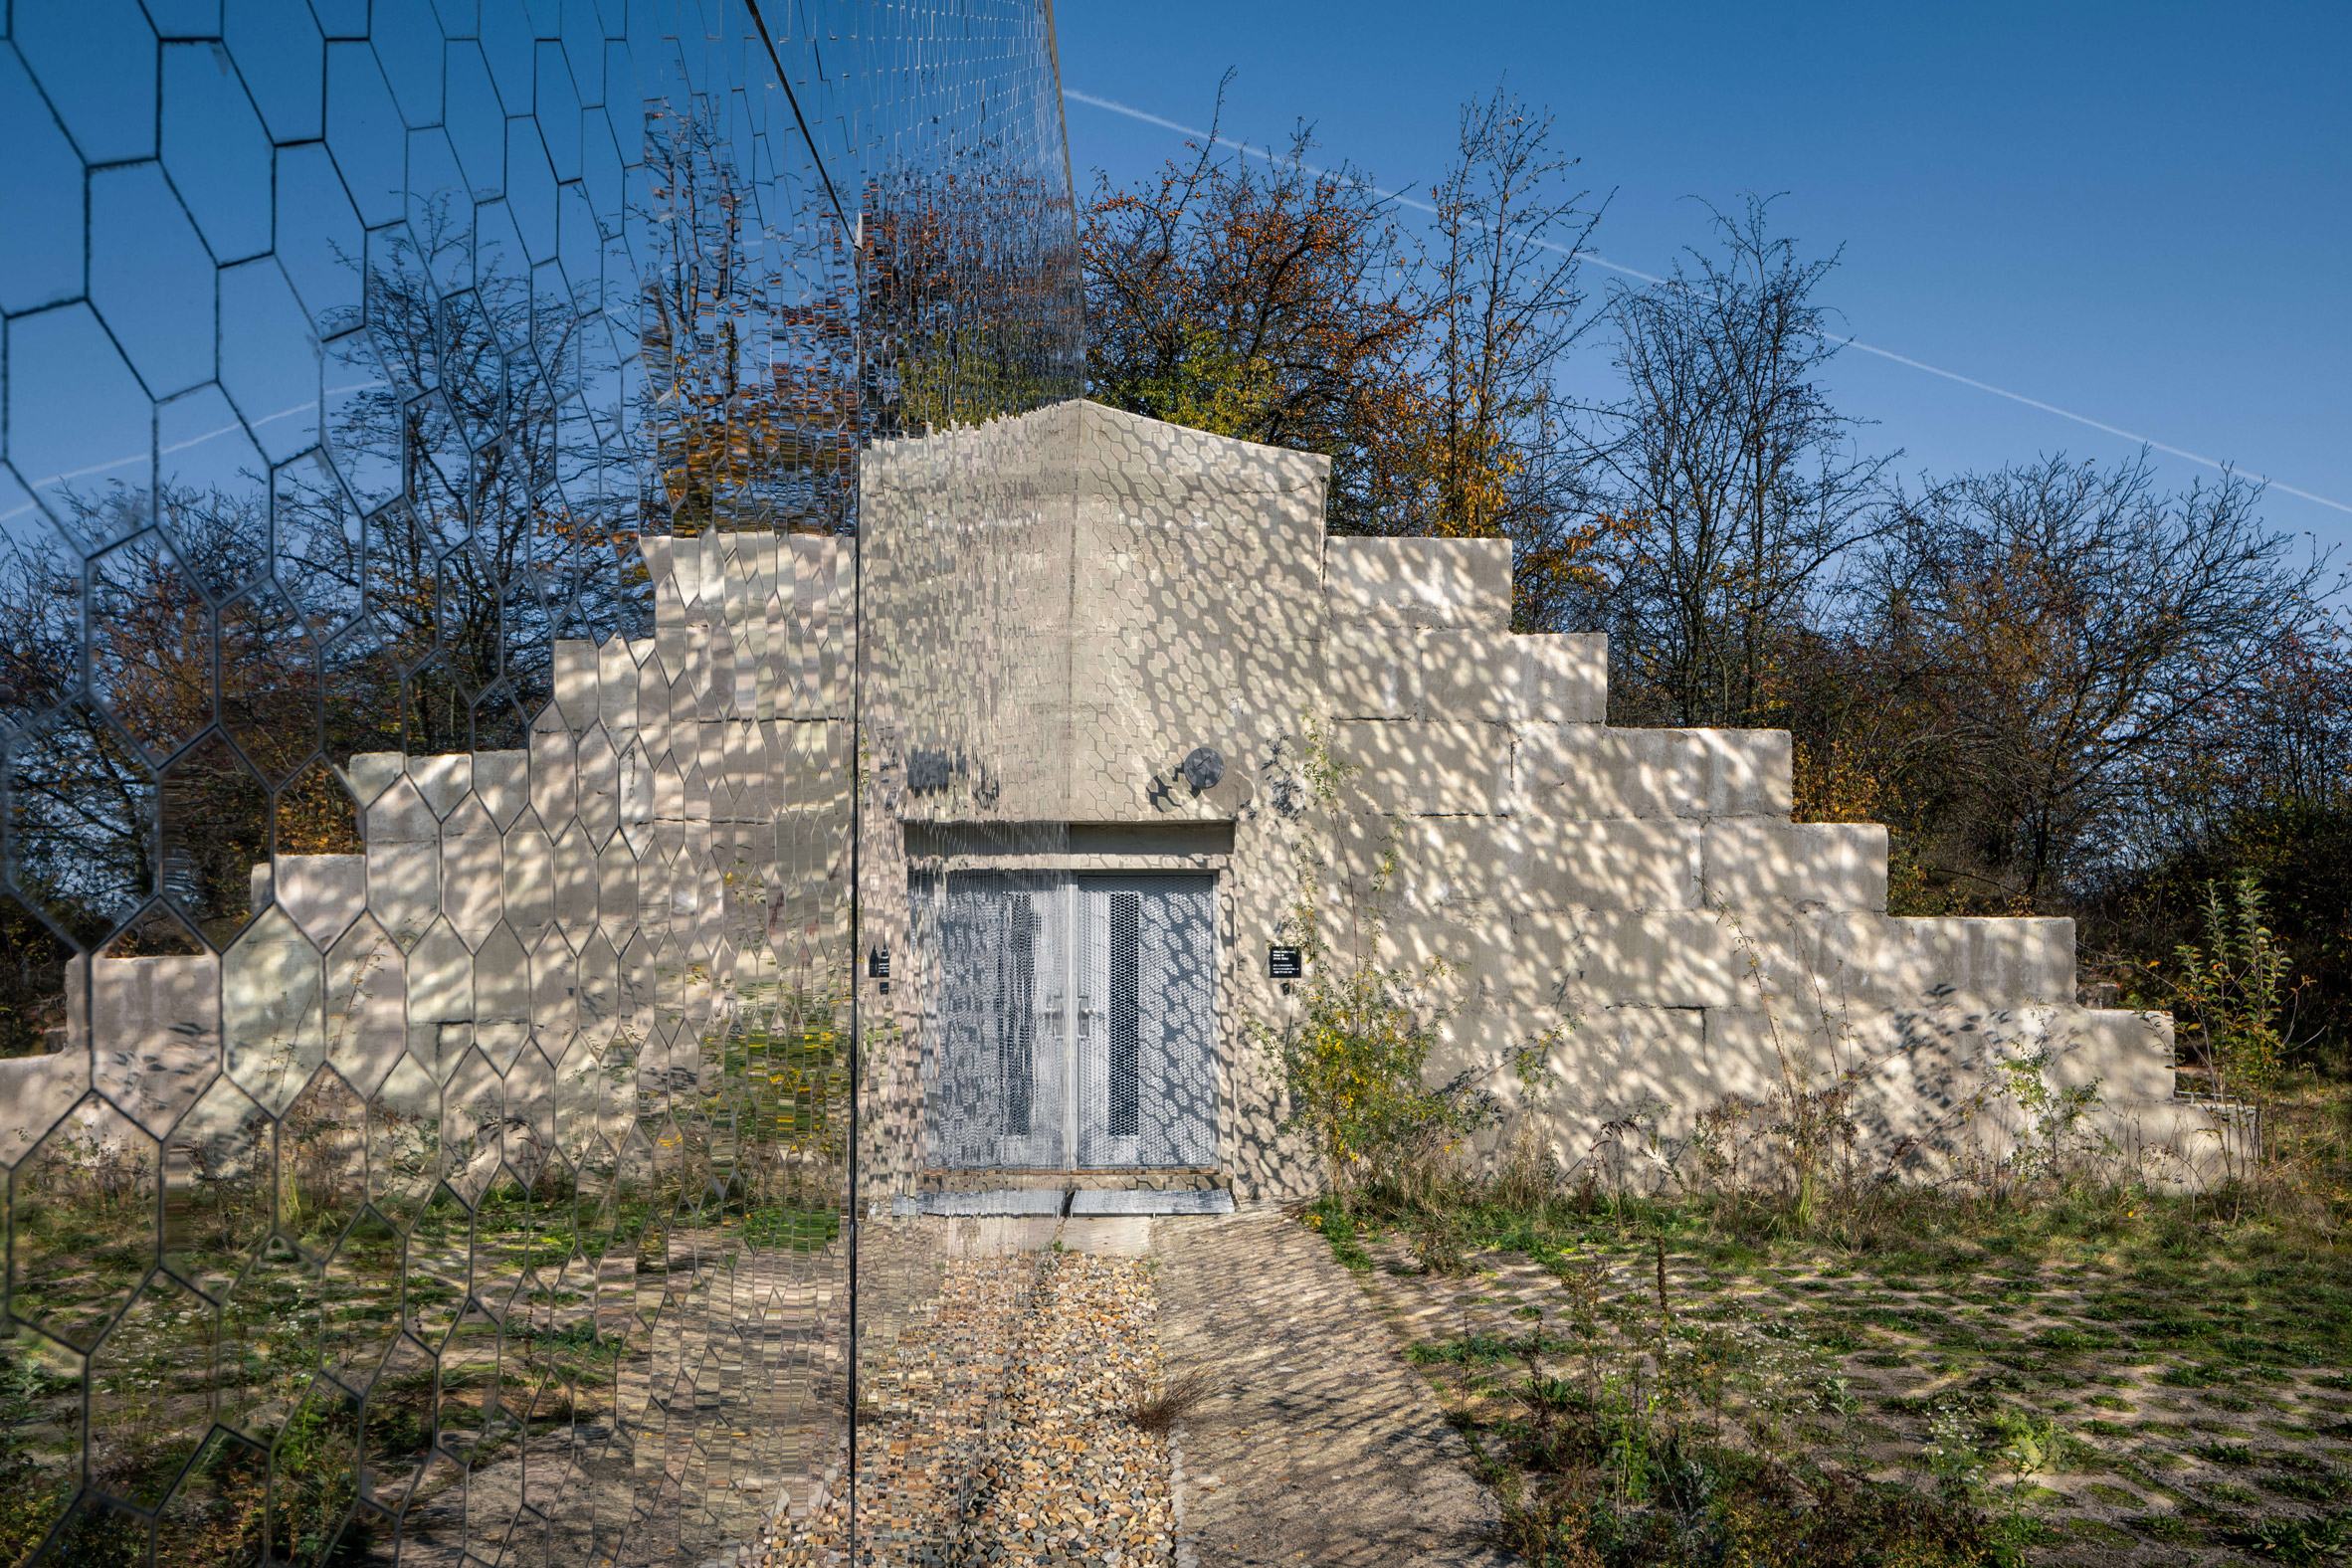 Bunker with mirrored facade